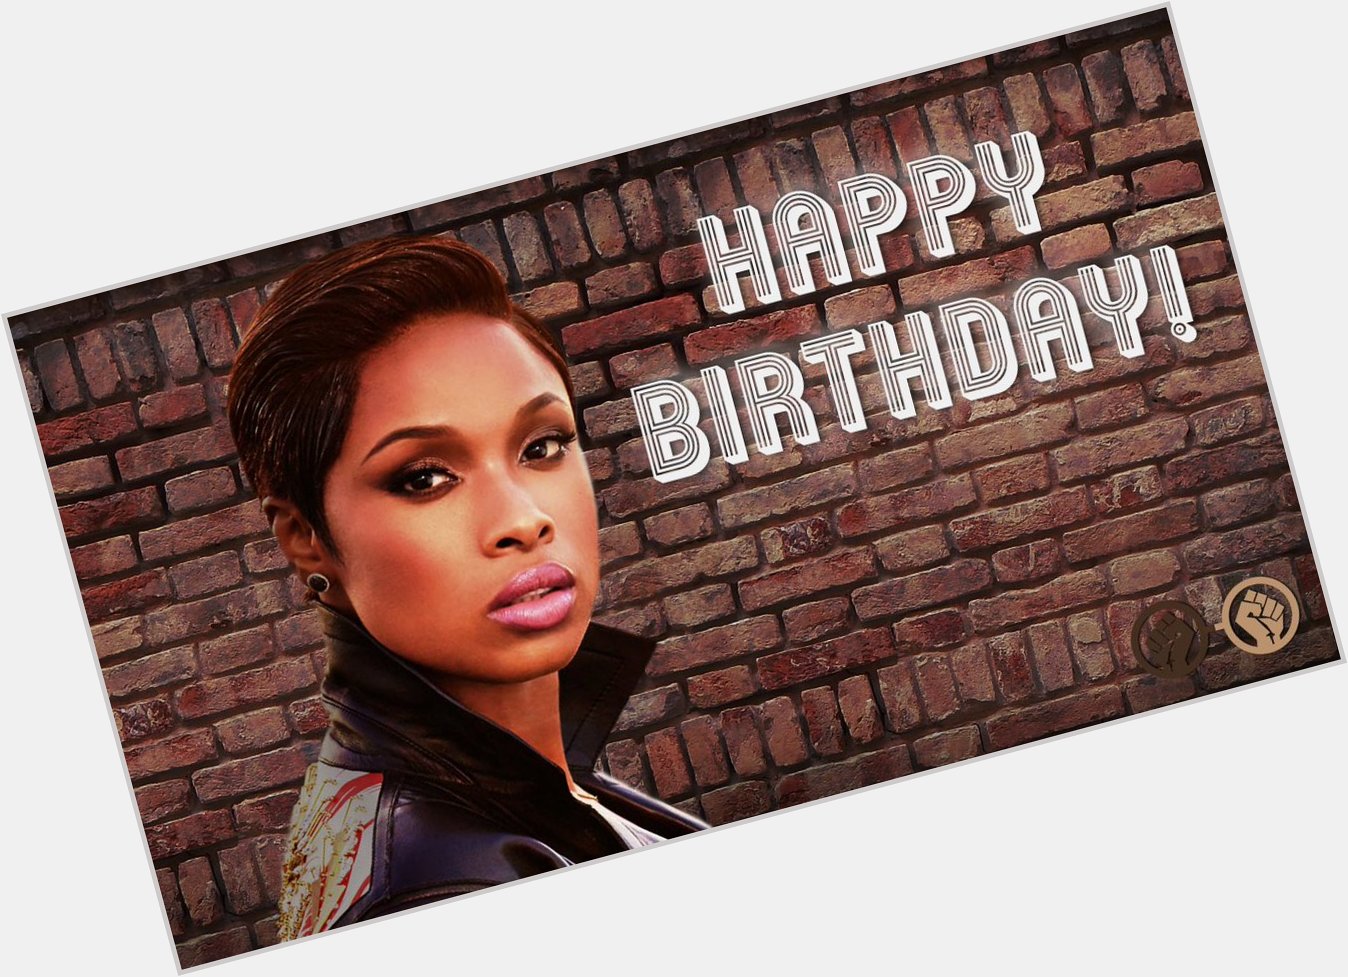 Happy Birthday to the incredibly talented Jennifer Hudson! The singer/actress turns 36 today! 